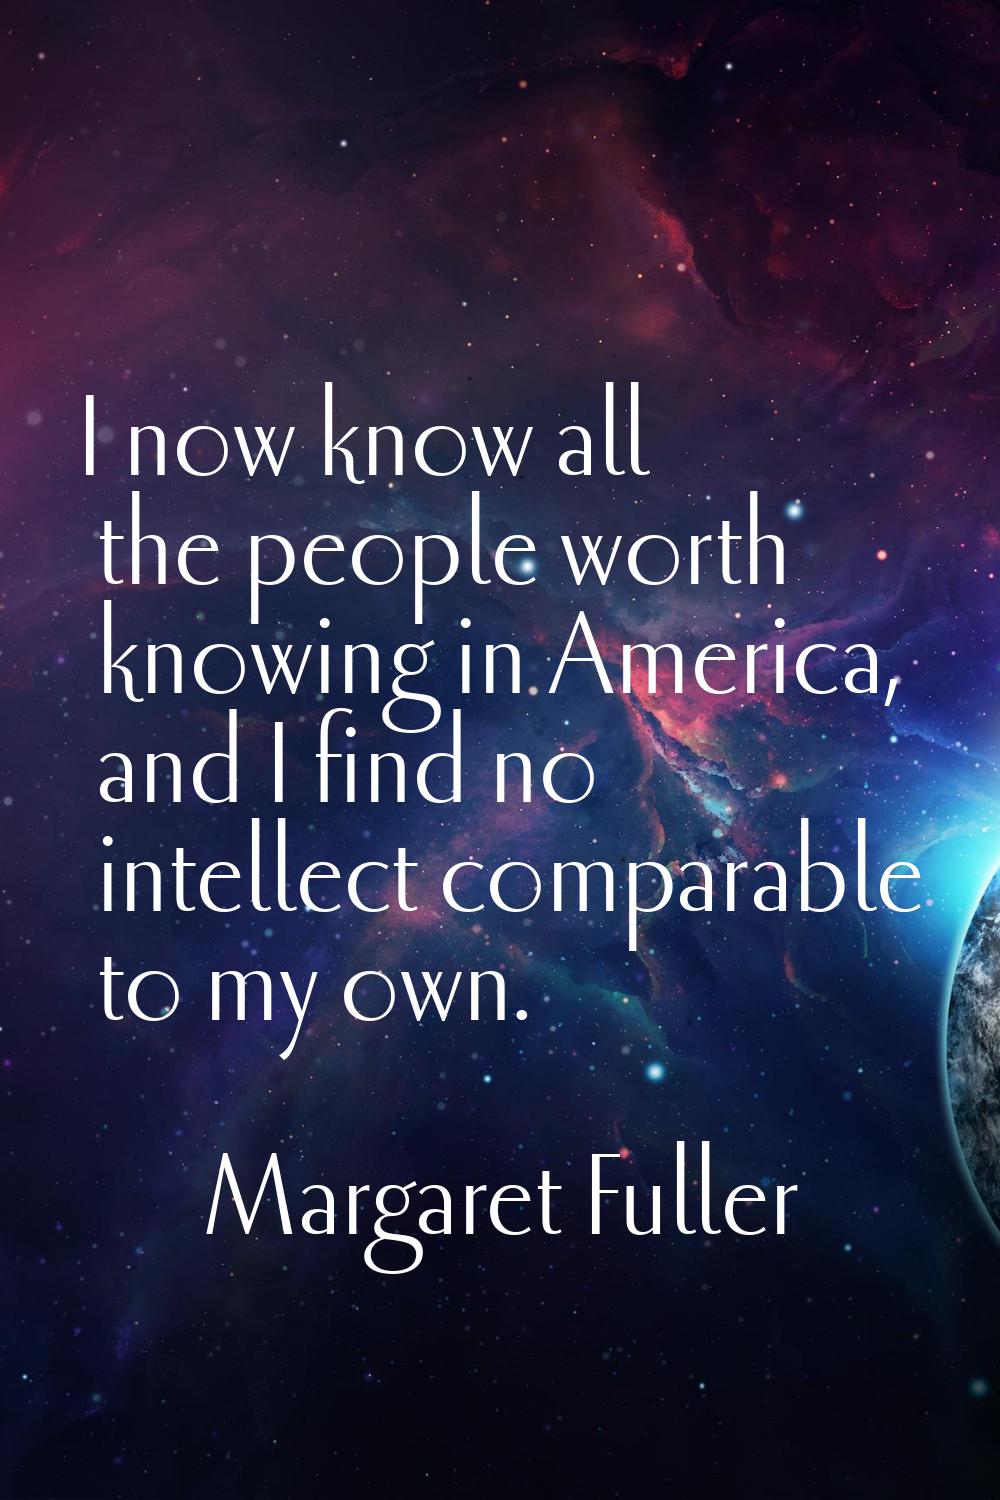 I now know all the people worth knowing in America, and I find no intellect comparable to my own.